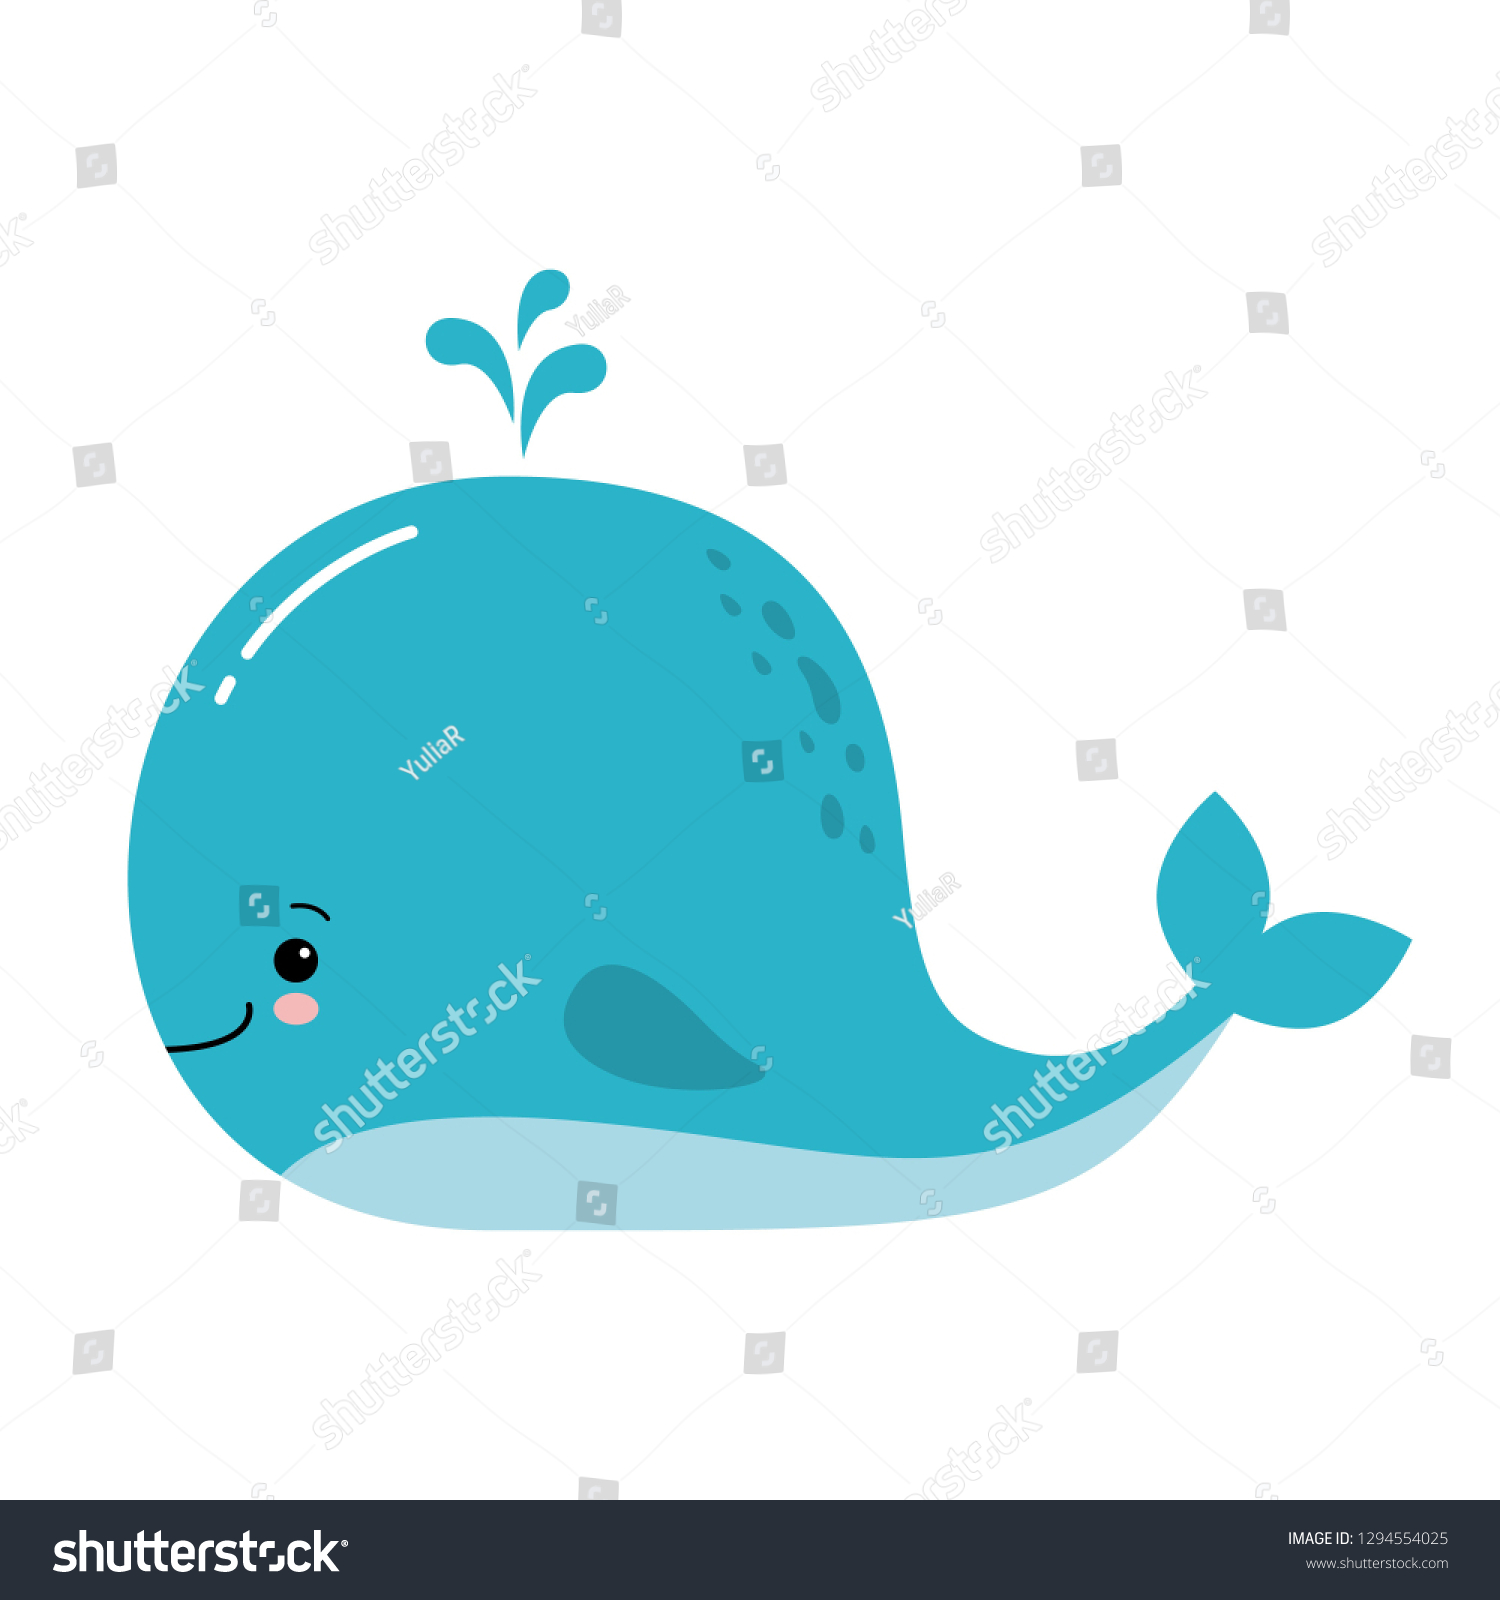 Cute Amusing Blue Whale Prints Image Stock Vector (Royalty Free ...